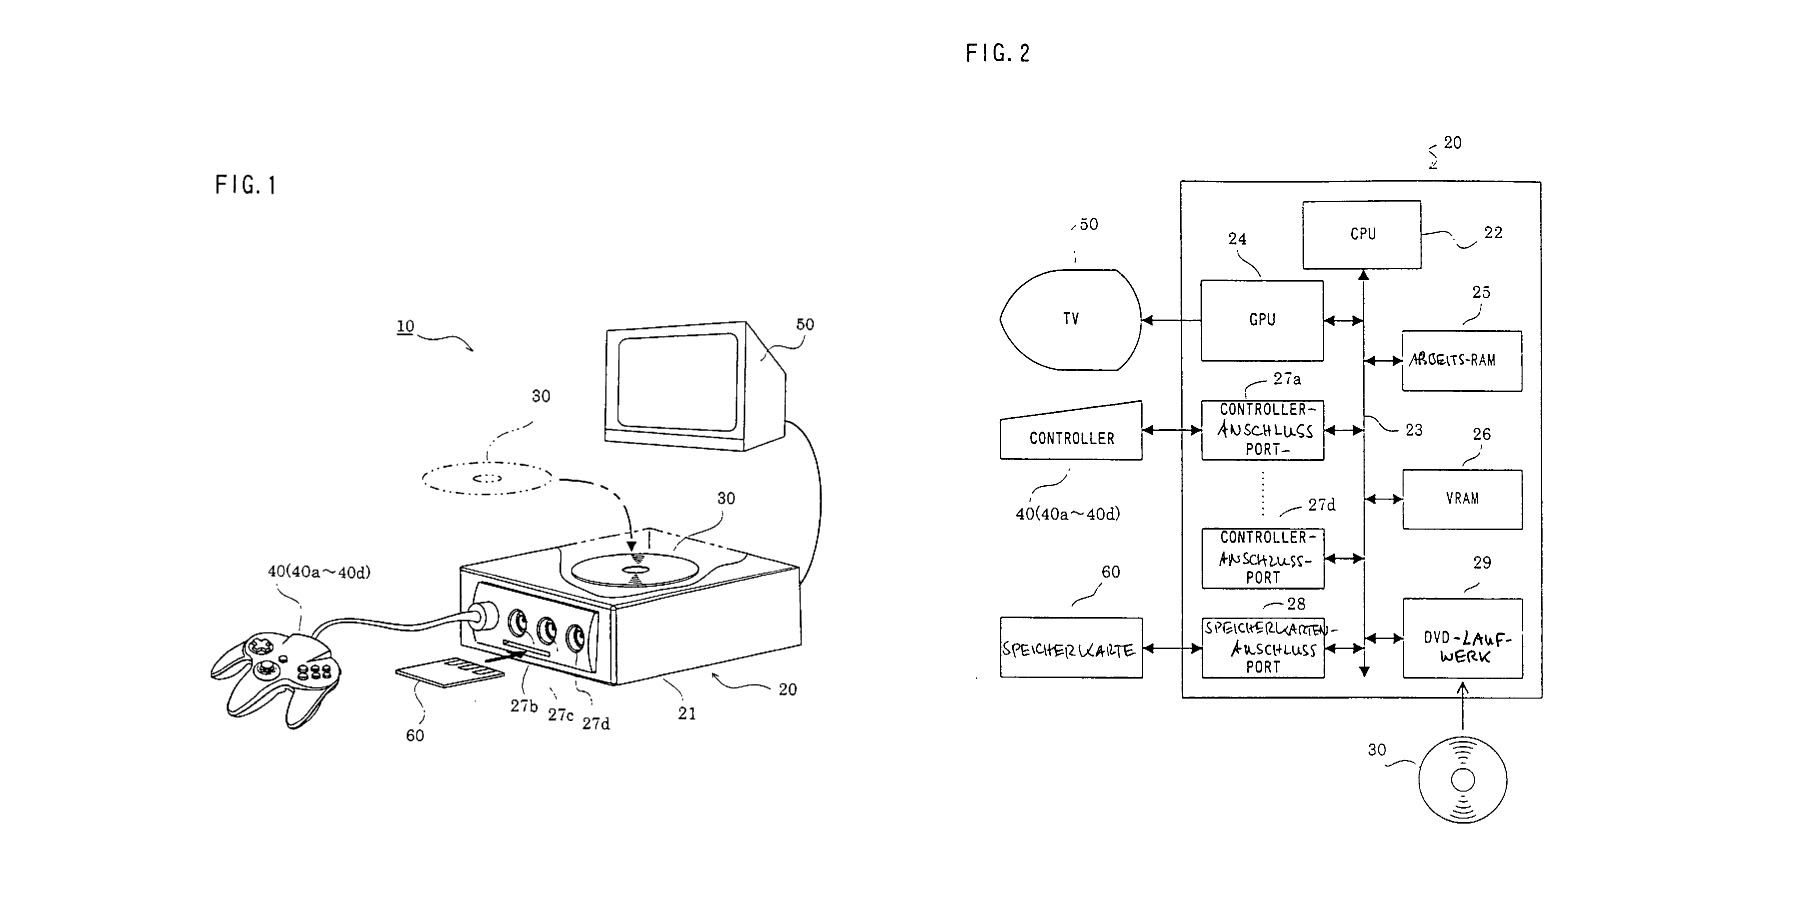 A patented concept art for a Nintendo 64 console with a DVD player.